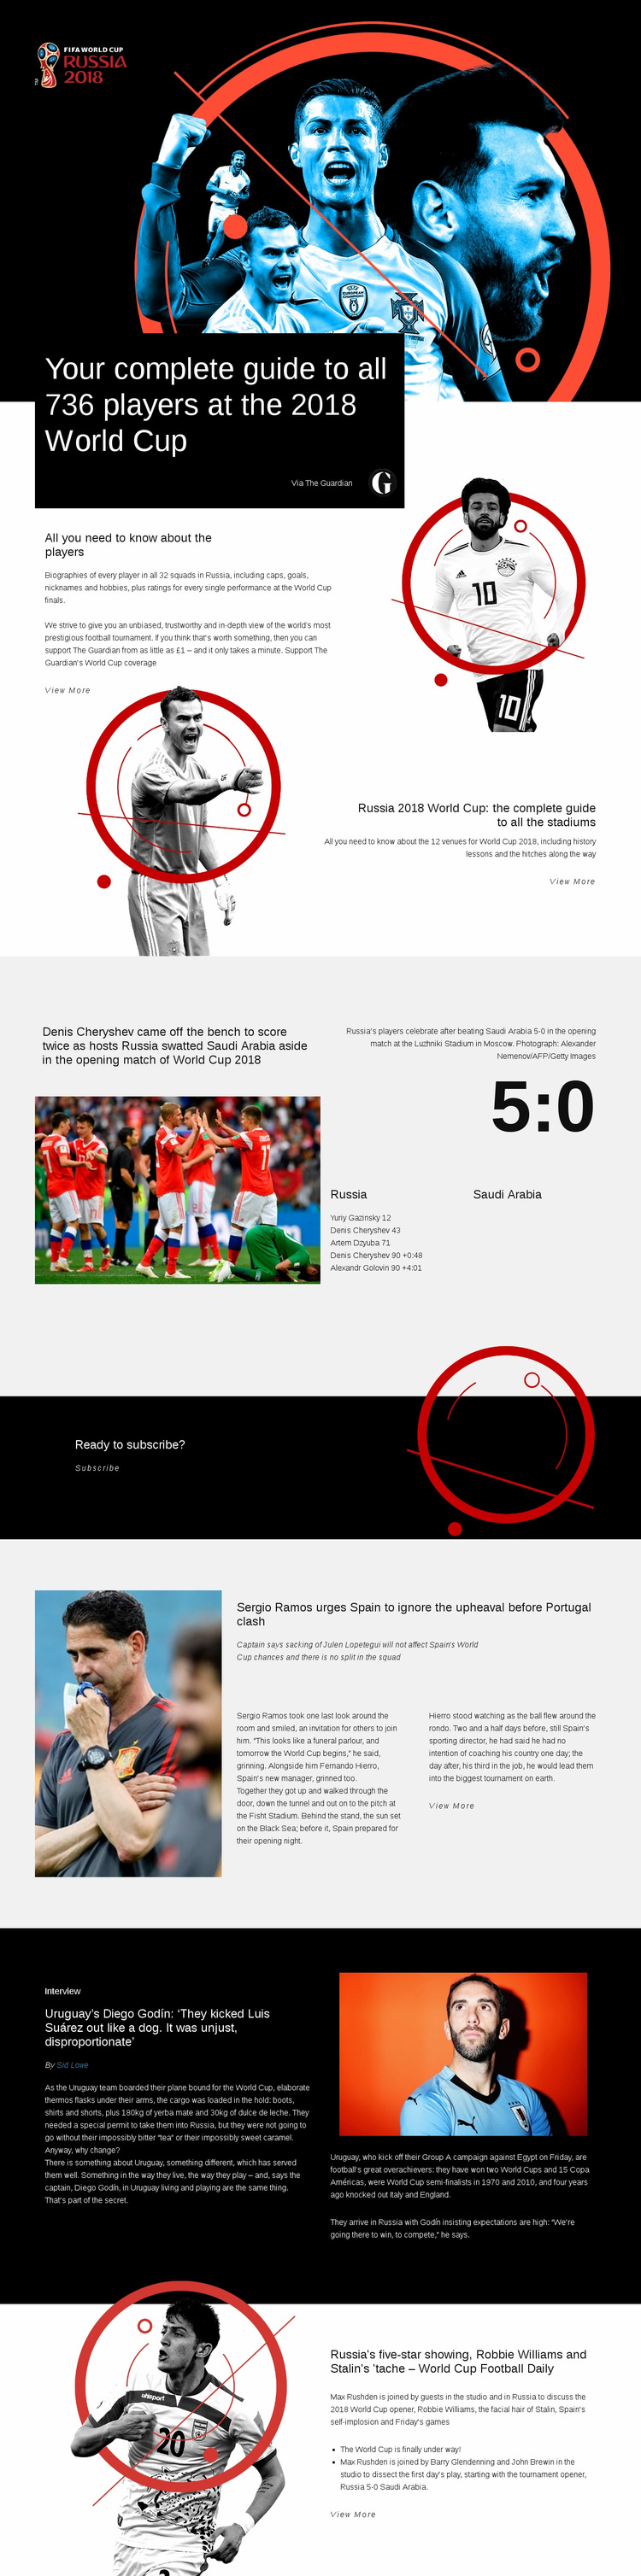 World Cup 2018 Web Page Design